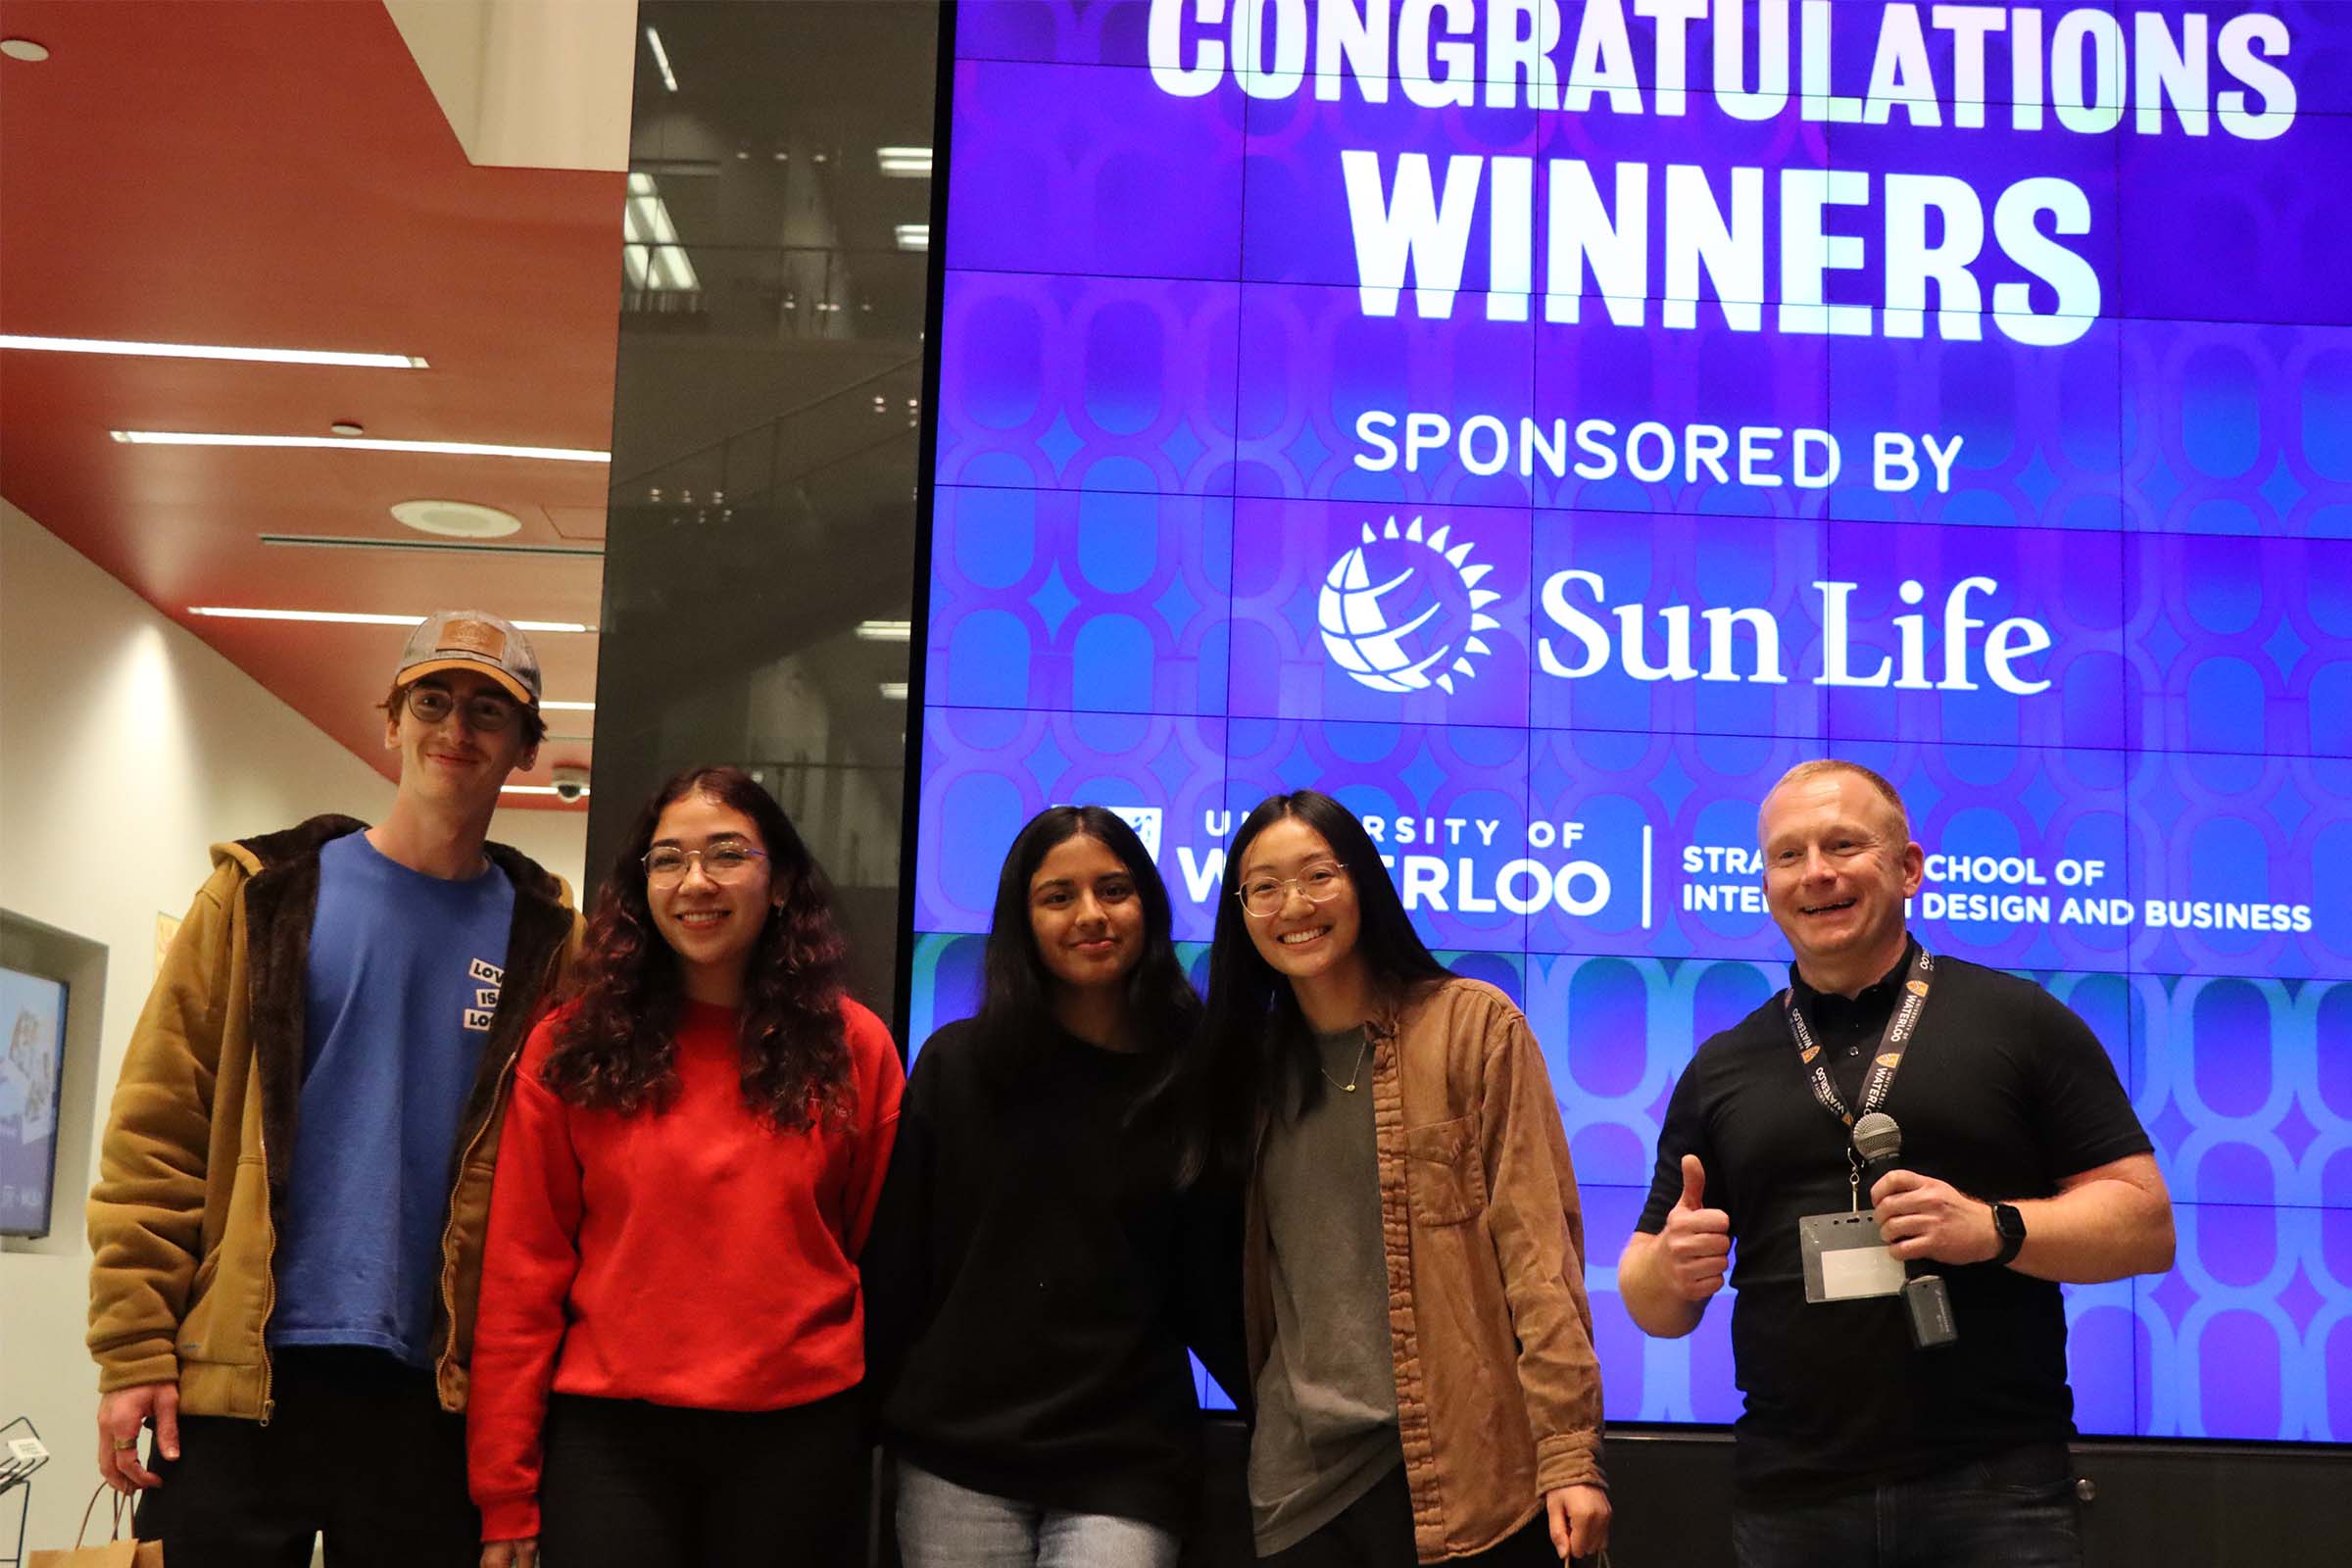 Runner up team of GBDA students and Sun Life representatives pose in front of the Wall that says "Congratulations Winners"